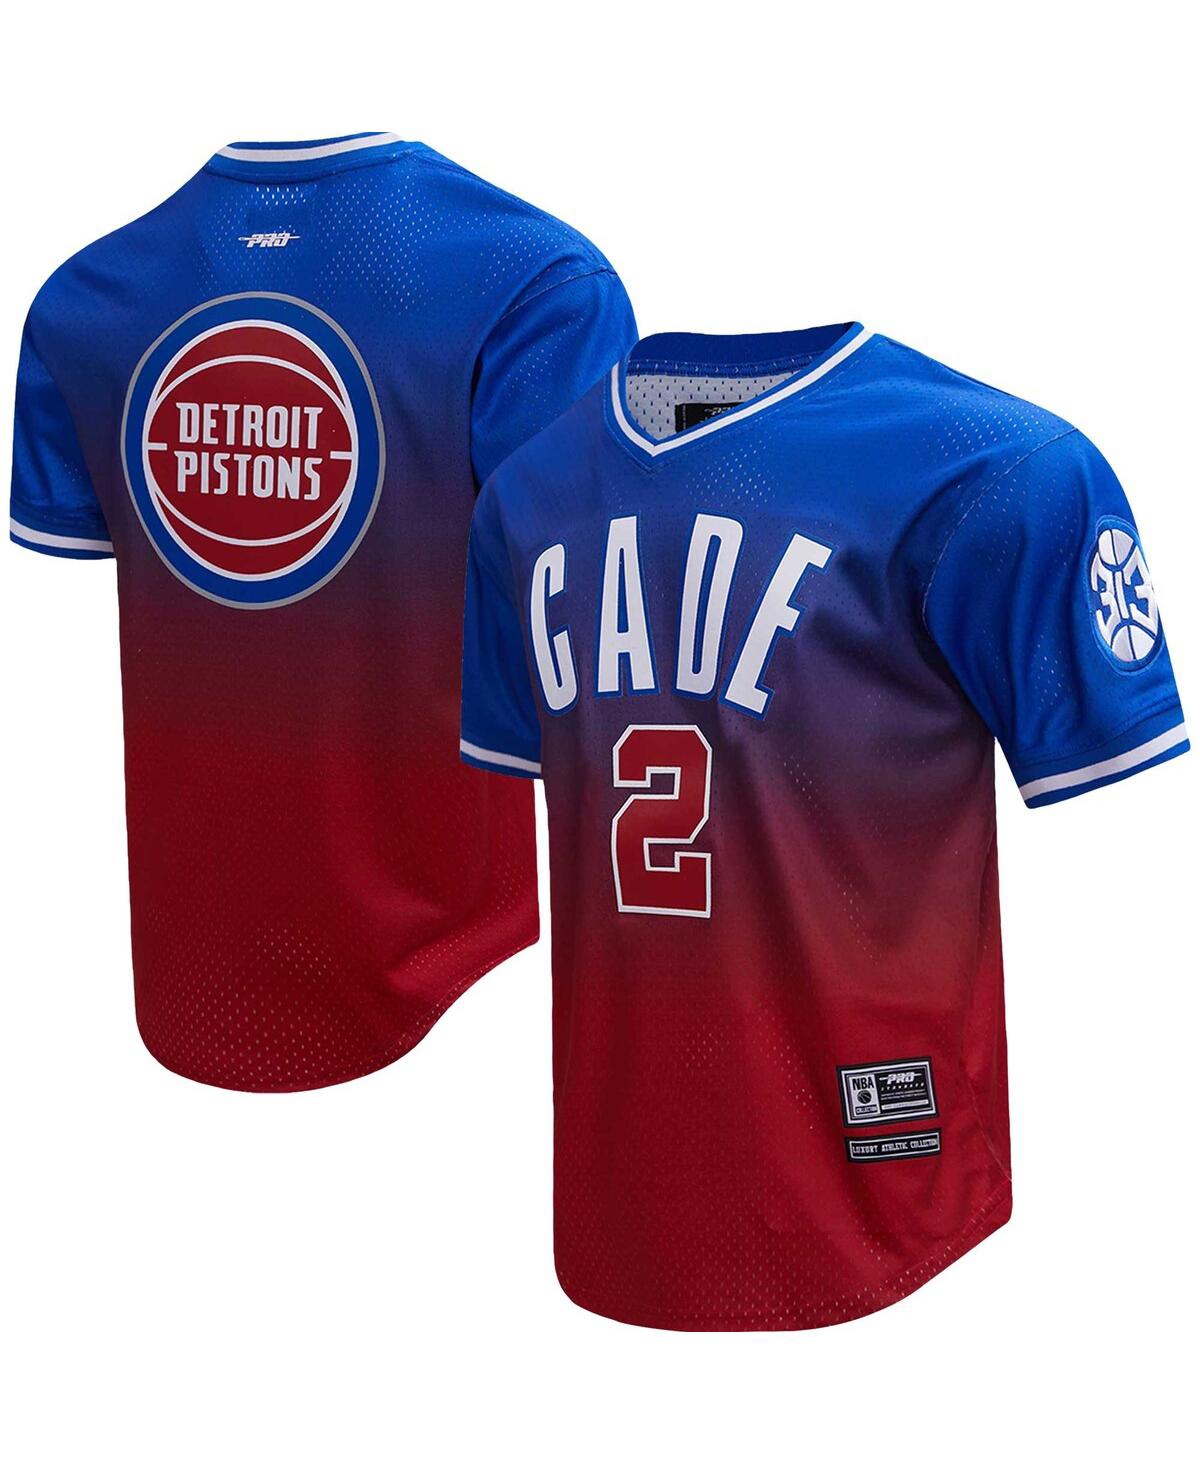 Men's Post Cade Cunningham Royal, Red Detroit Pistons Ombre Name and Number T-shirt - Royal, Red